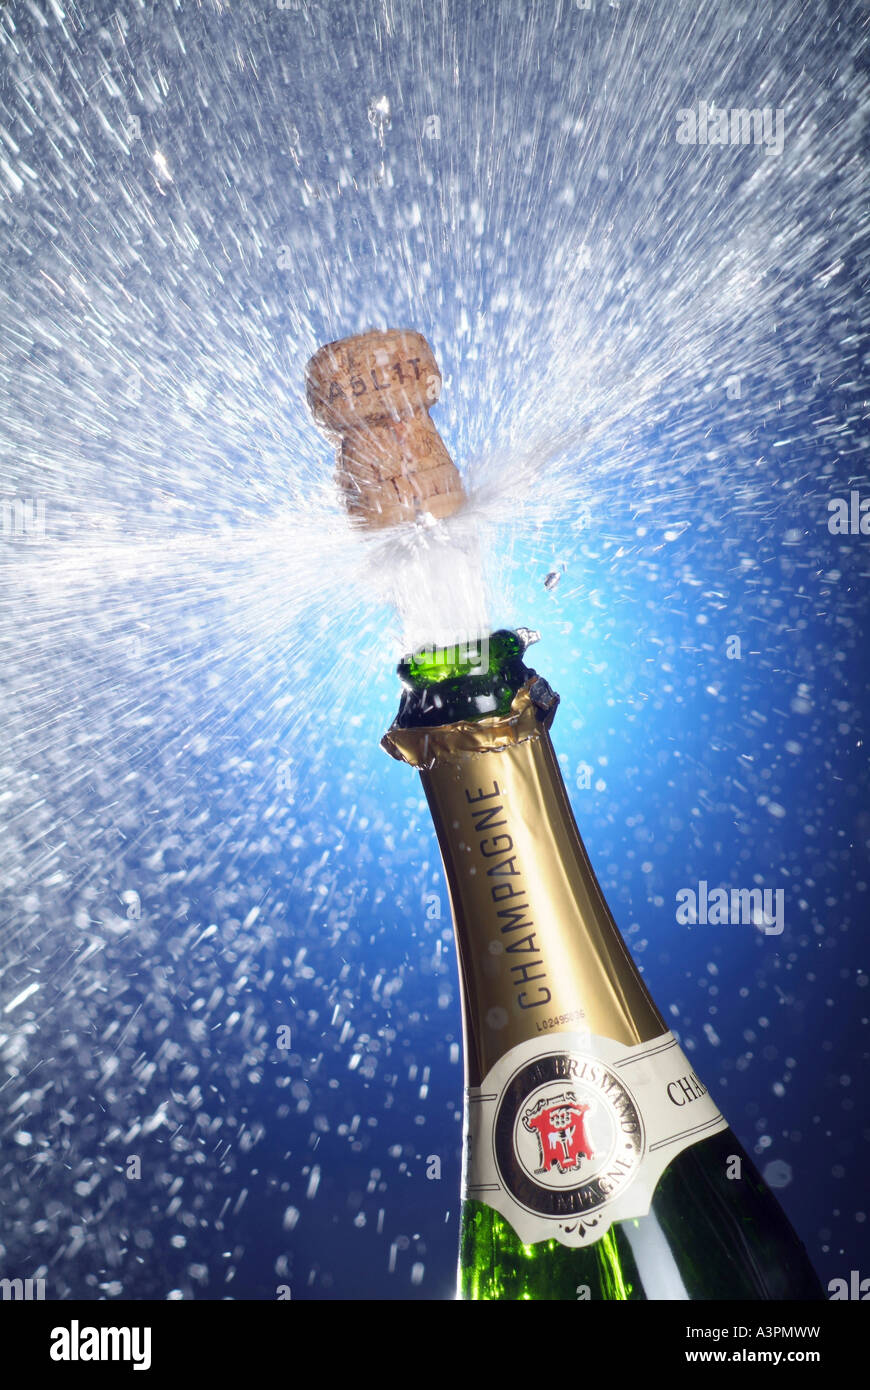 Cork shooting out of a champagne bottle Stock Photo